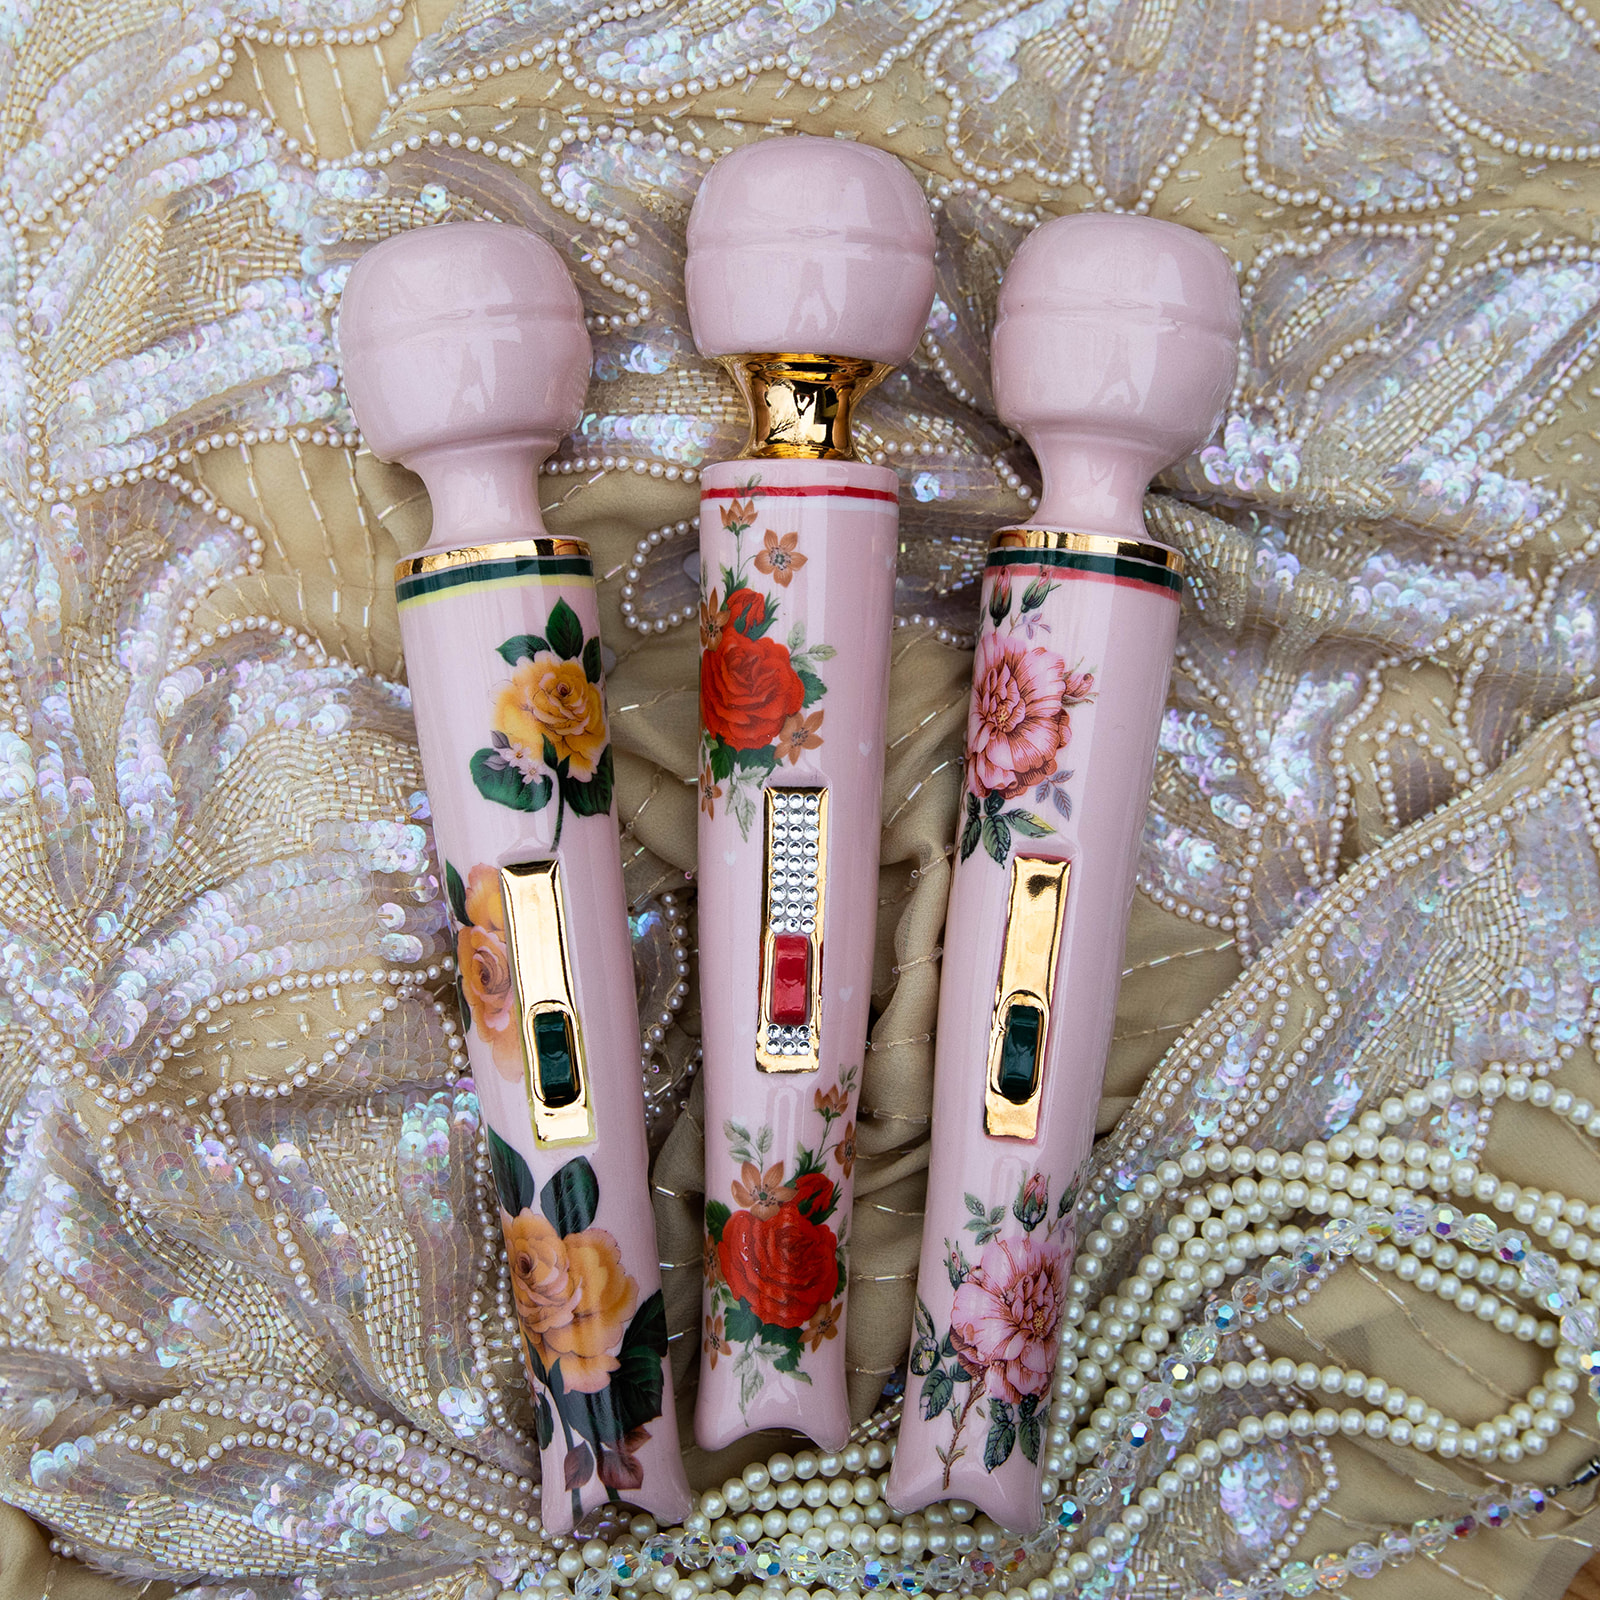 Three Magic Wand inhaler pipes in pink with beautiful rose designs.